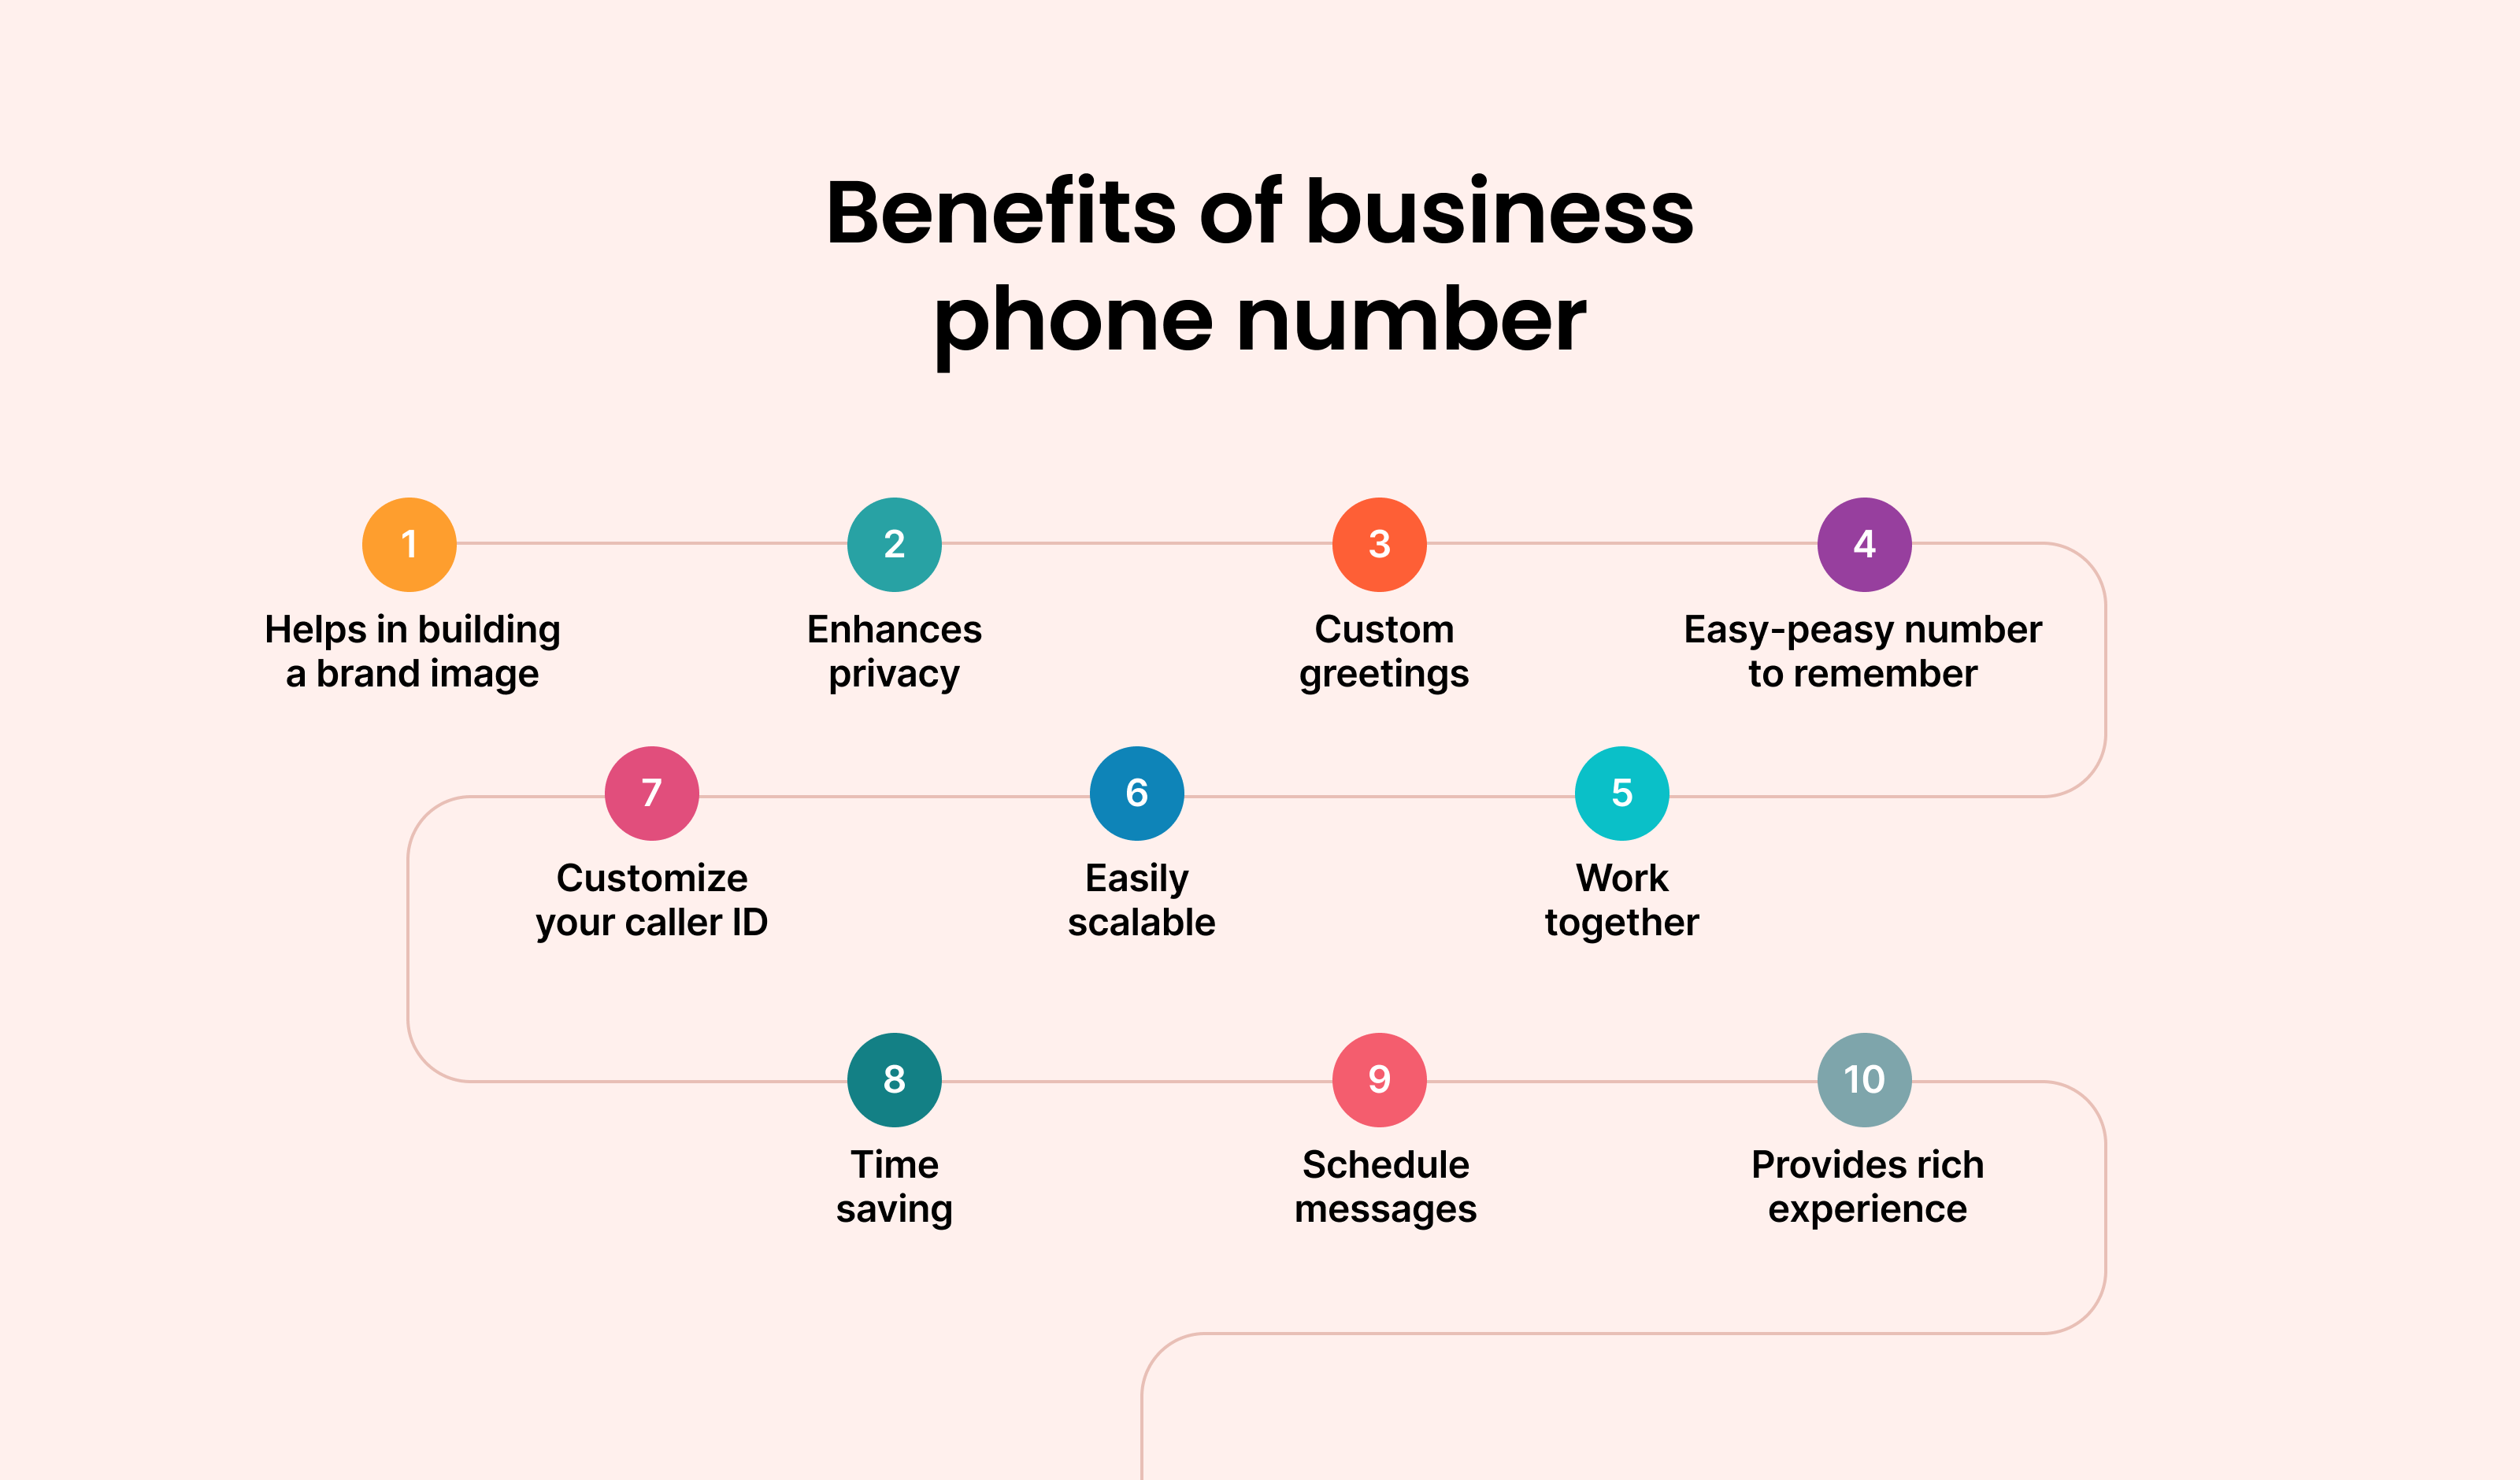 Why are Business Phone Numbers promising?